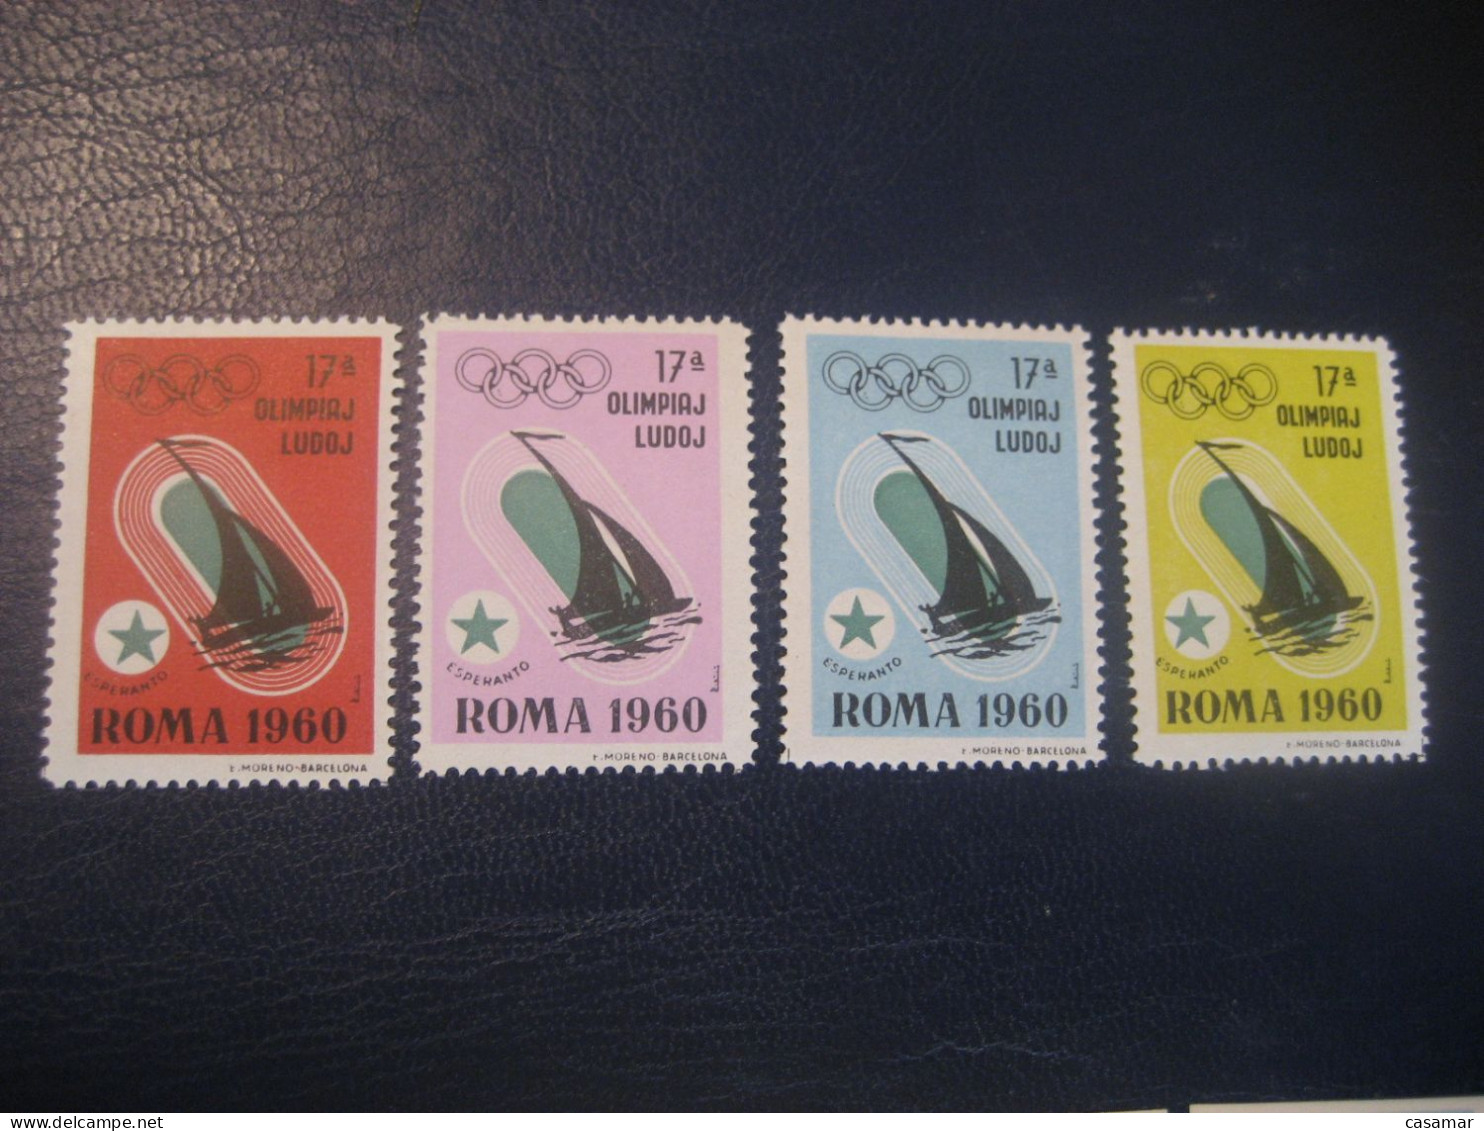 ROMA 1960 Sailing Voile Olympic Games Olympics Esperanto 4 Poster Stamp Vignette ITALY Spain Label - Voile